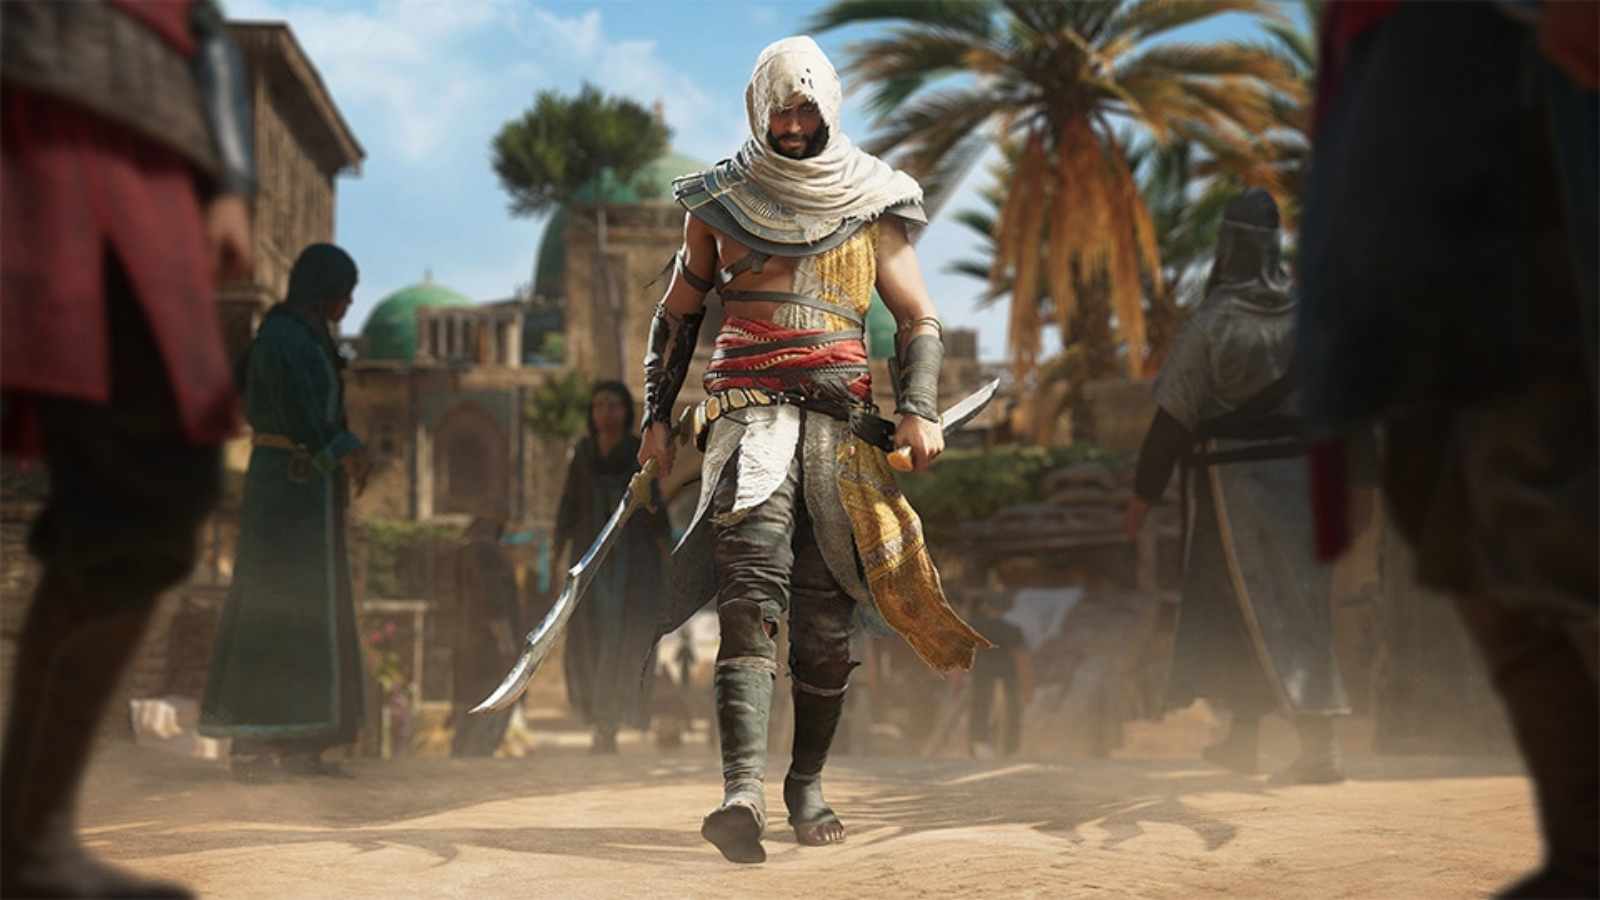 Assassin's Creed Red release date appears online, is way sooner